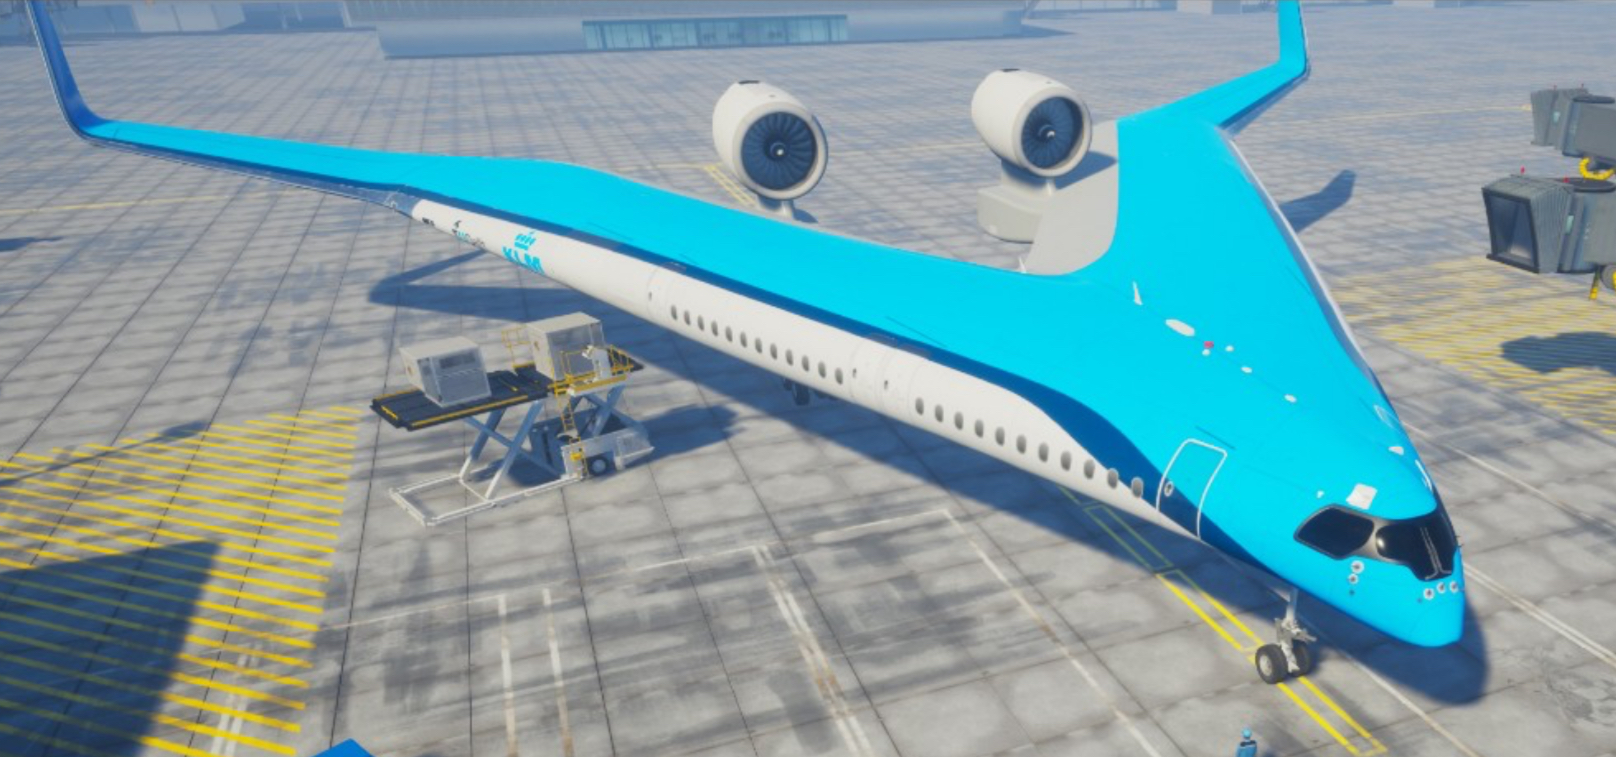 Flying-V aircraft concept developed by TU Delft in collaboration with KLM in IATA Aircraft Technology Roadmap to 2050